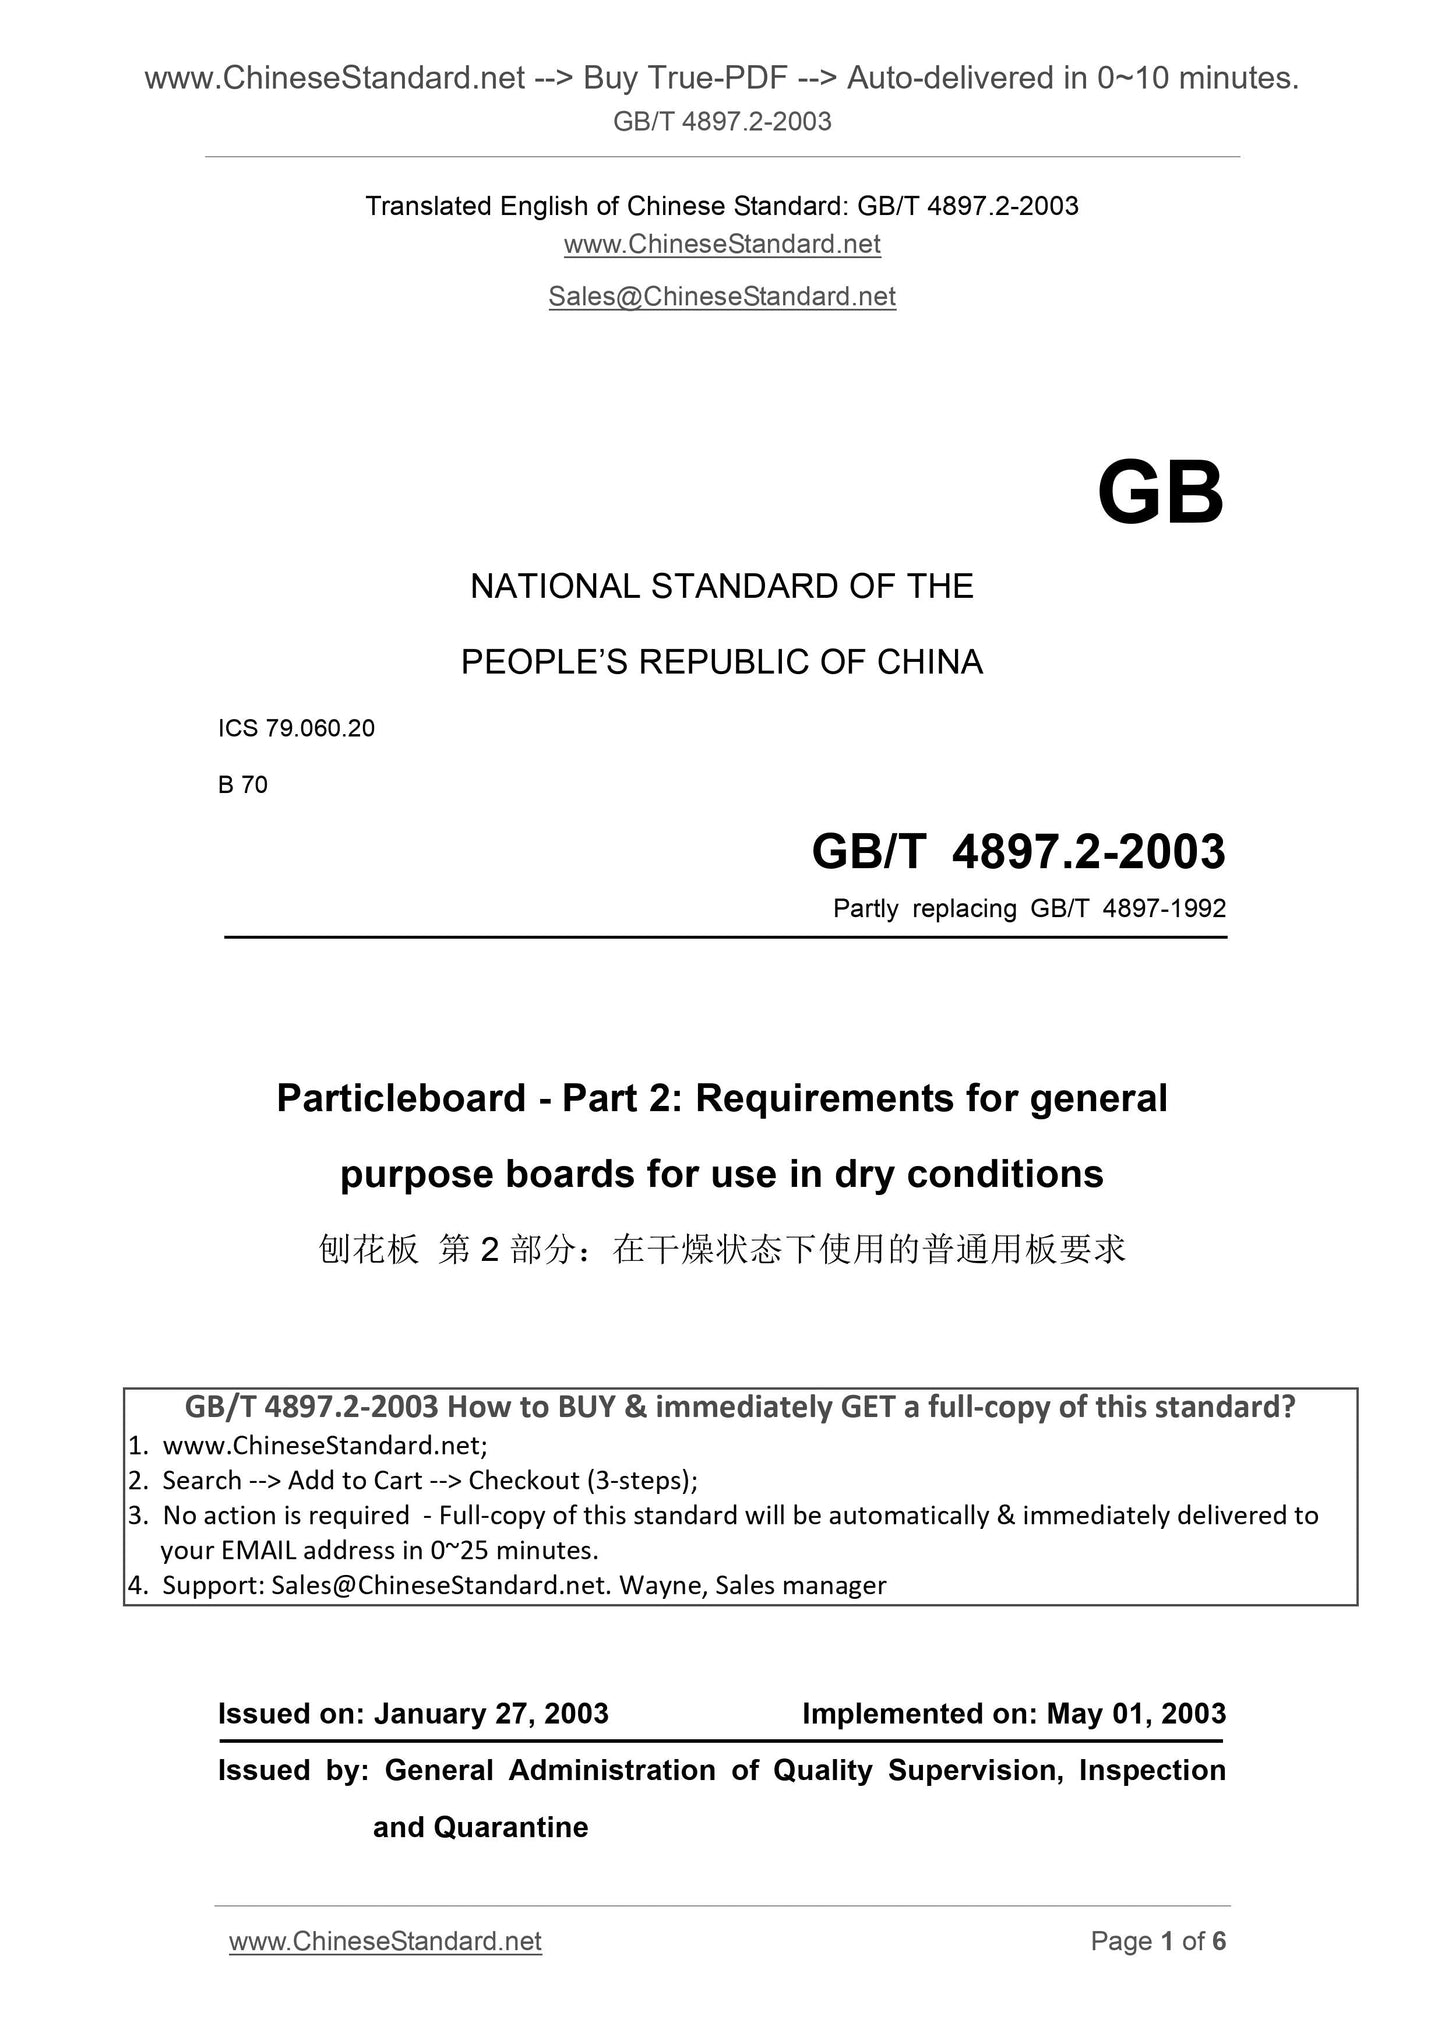 GB/T 4897.2-2003 Page 1